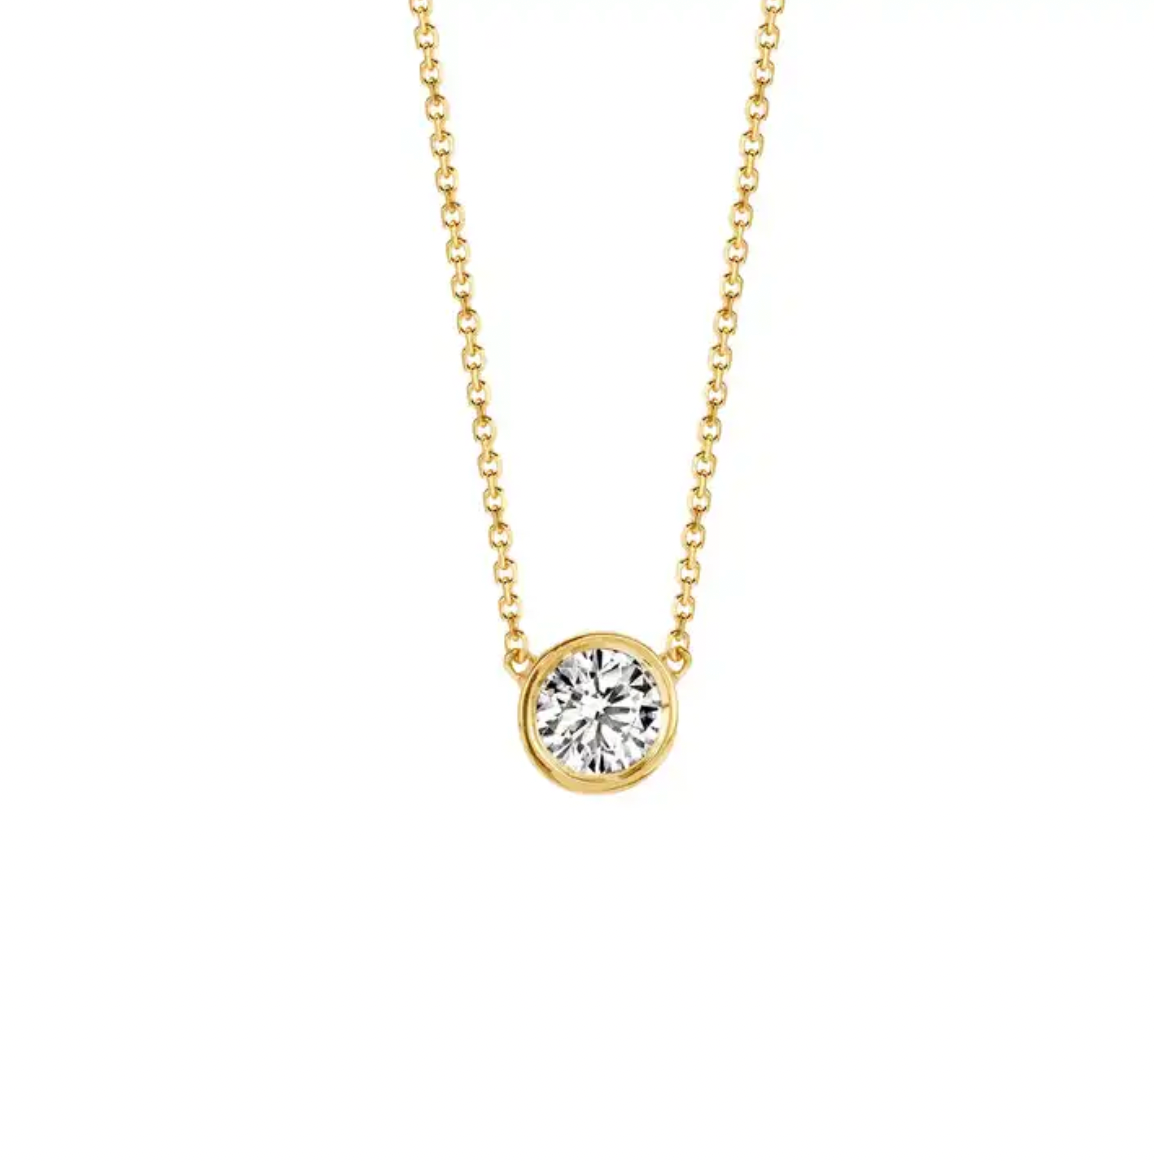  Featherly adjustable cubic zirconia bezel necklace in gold 